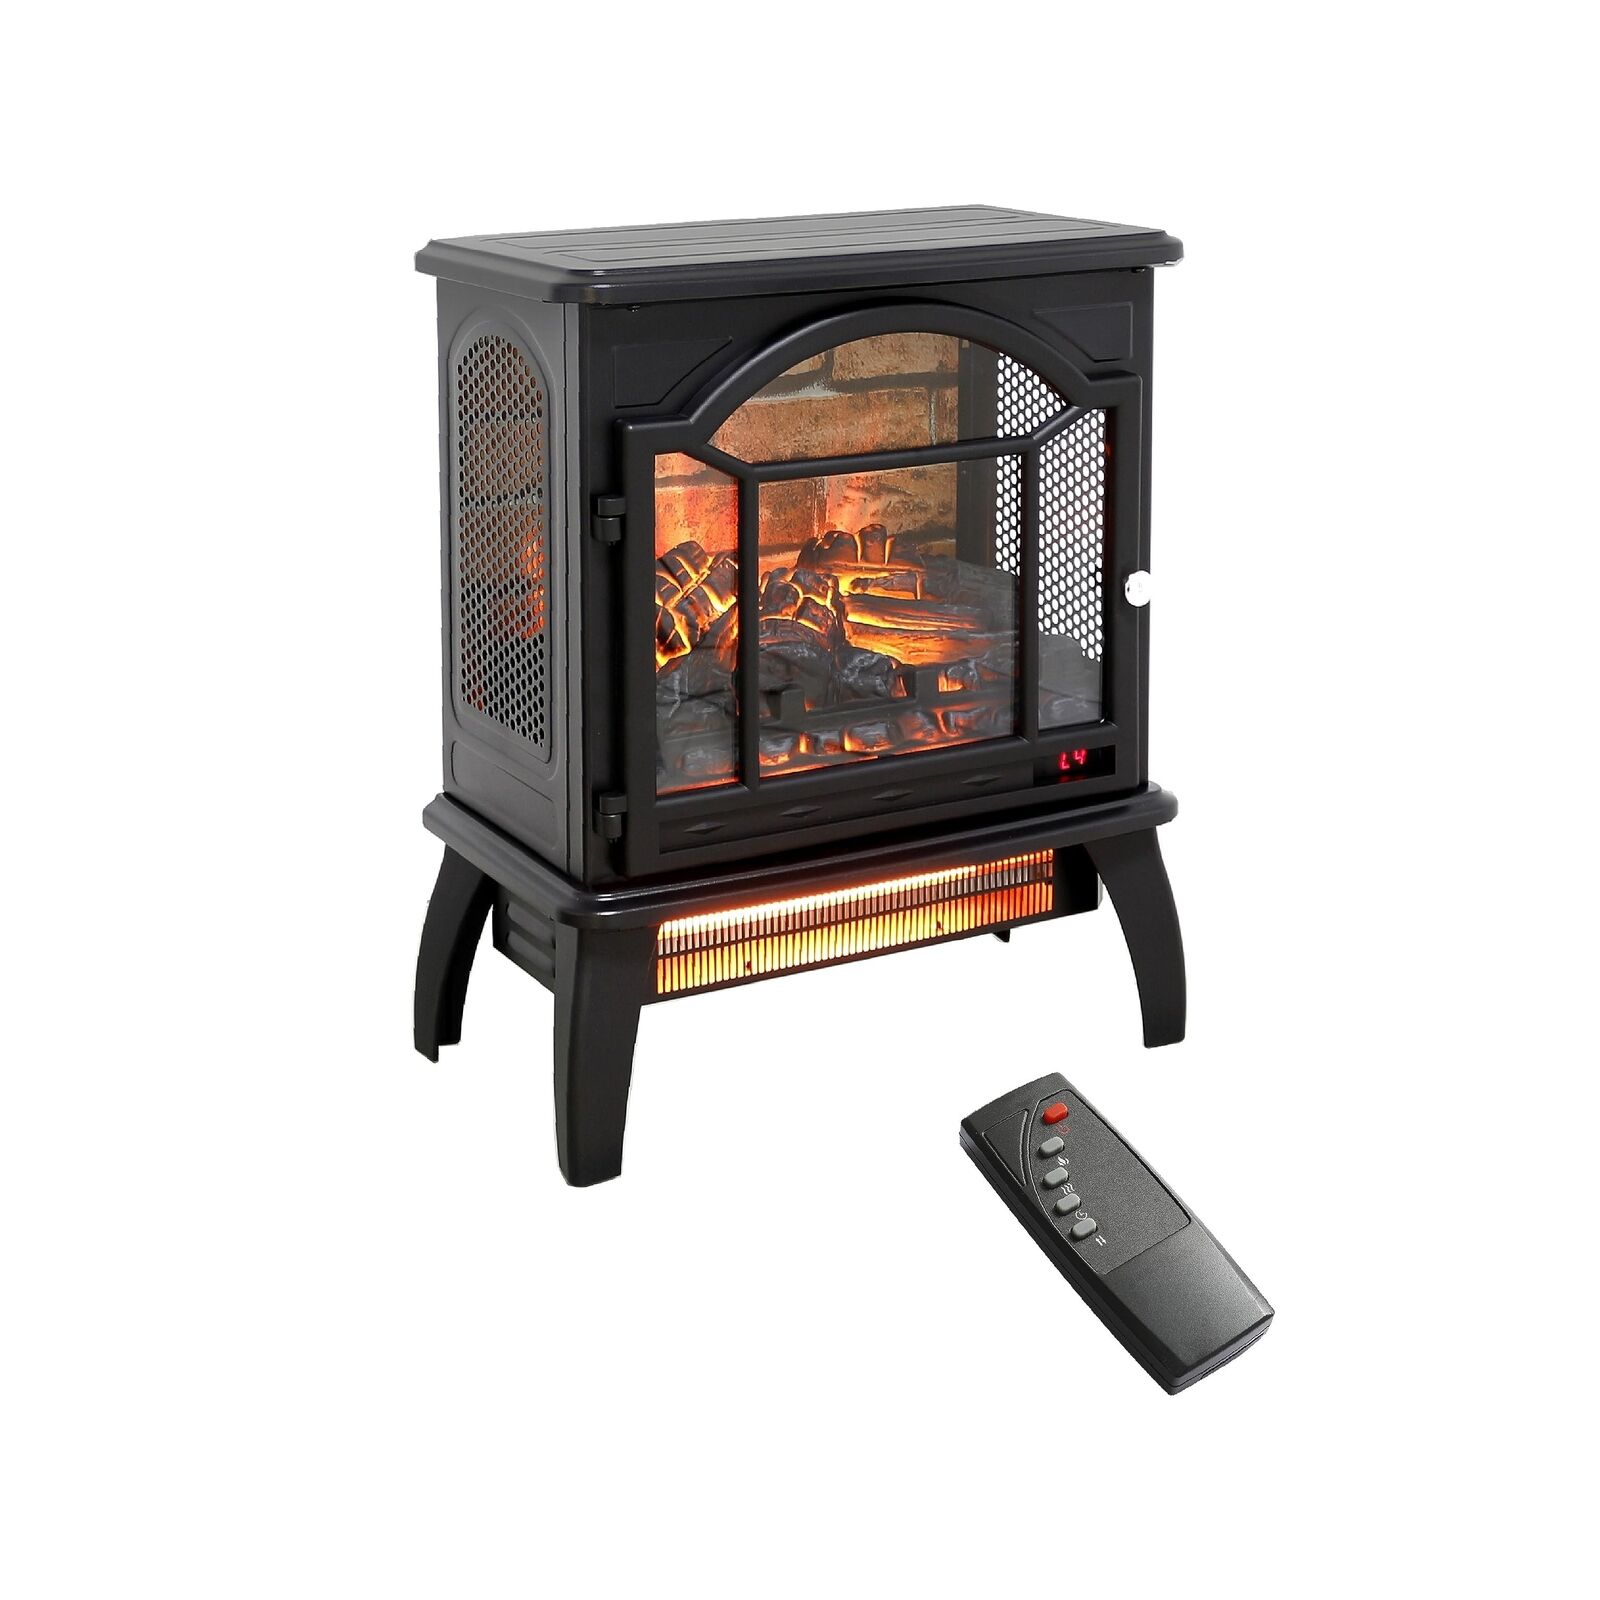 thinkstar Freestanding Electric Fireplace Heater,Portable Infrared Fireplace St...